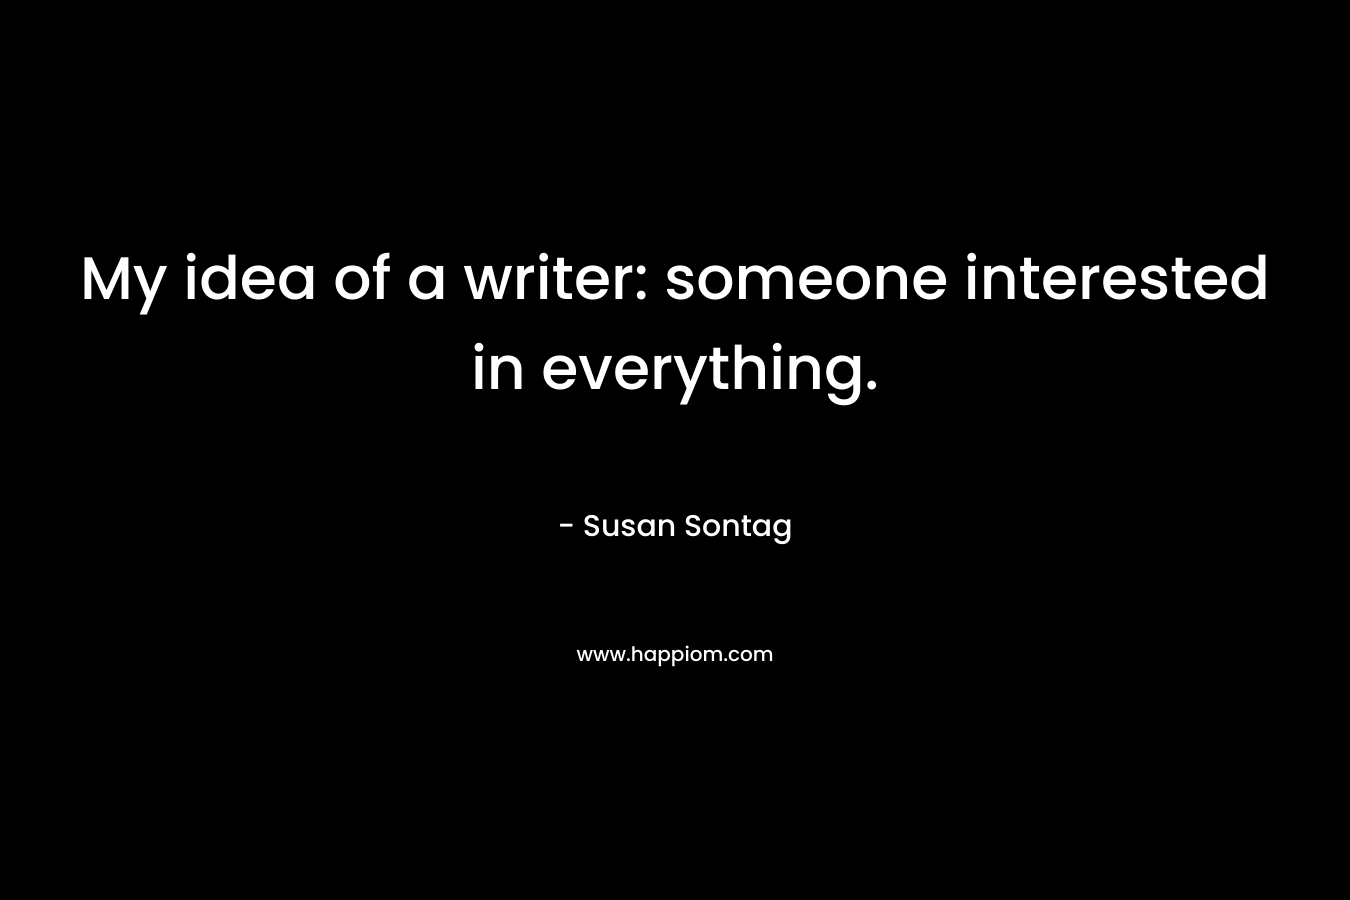 My idea of a writer: someone interested in everything. – Susan Sontag